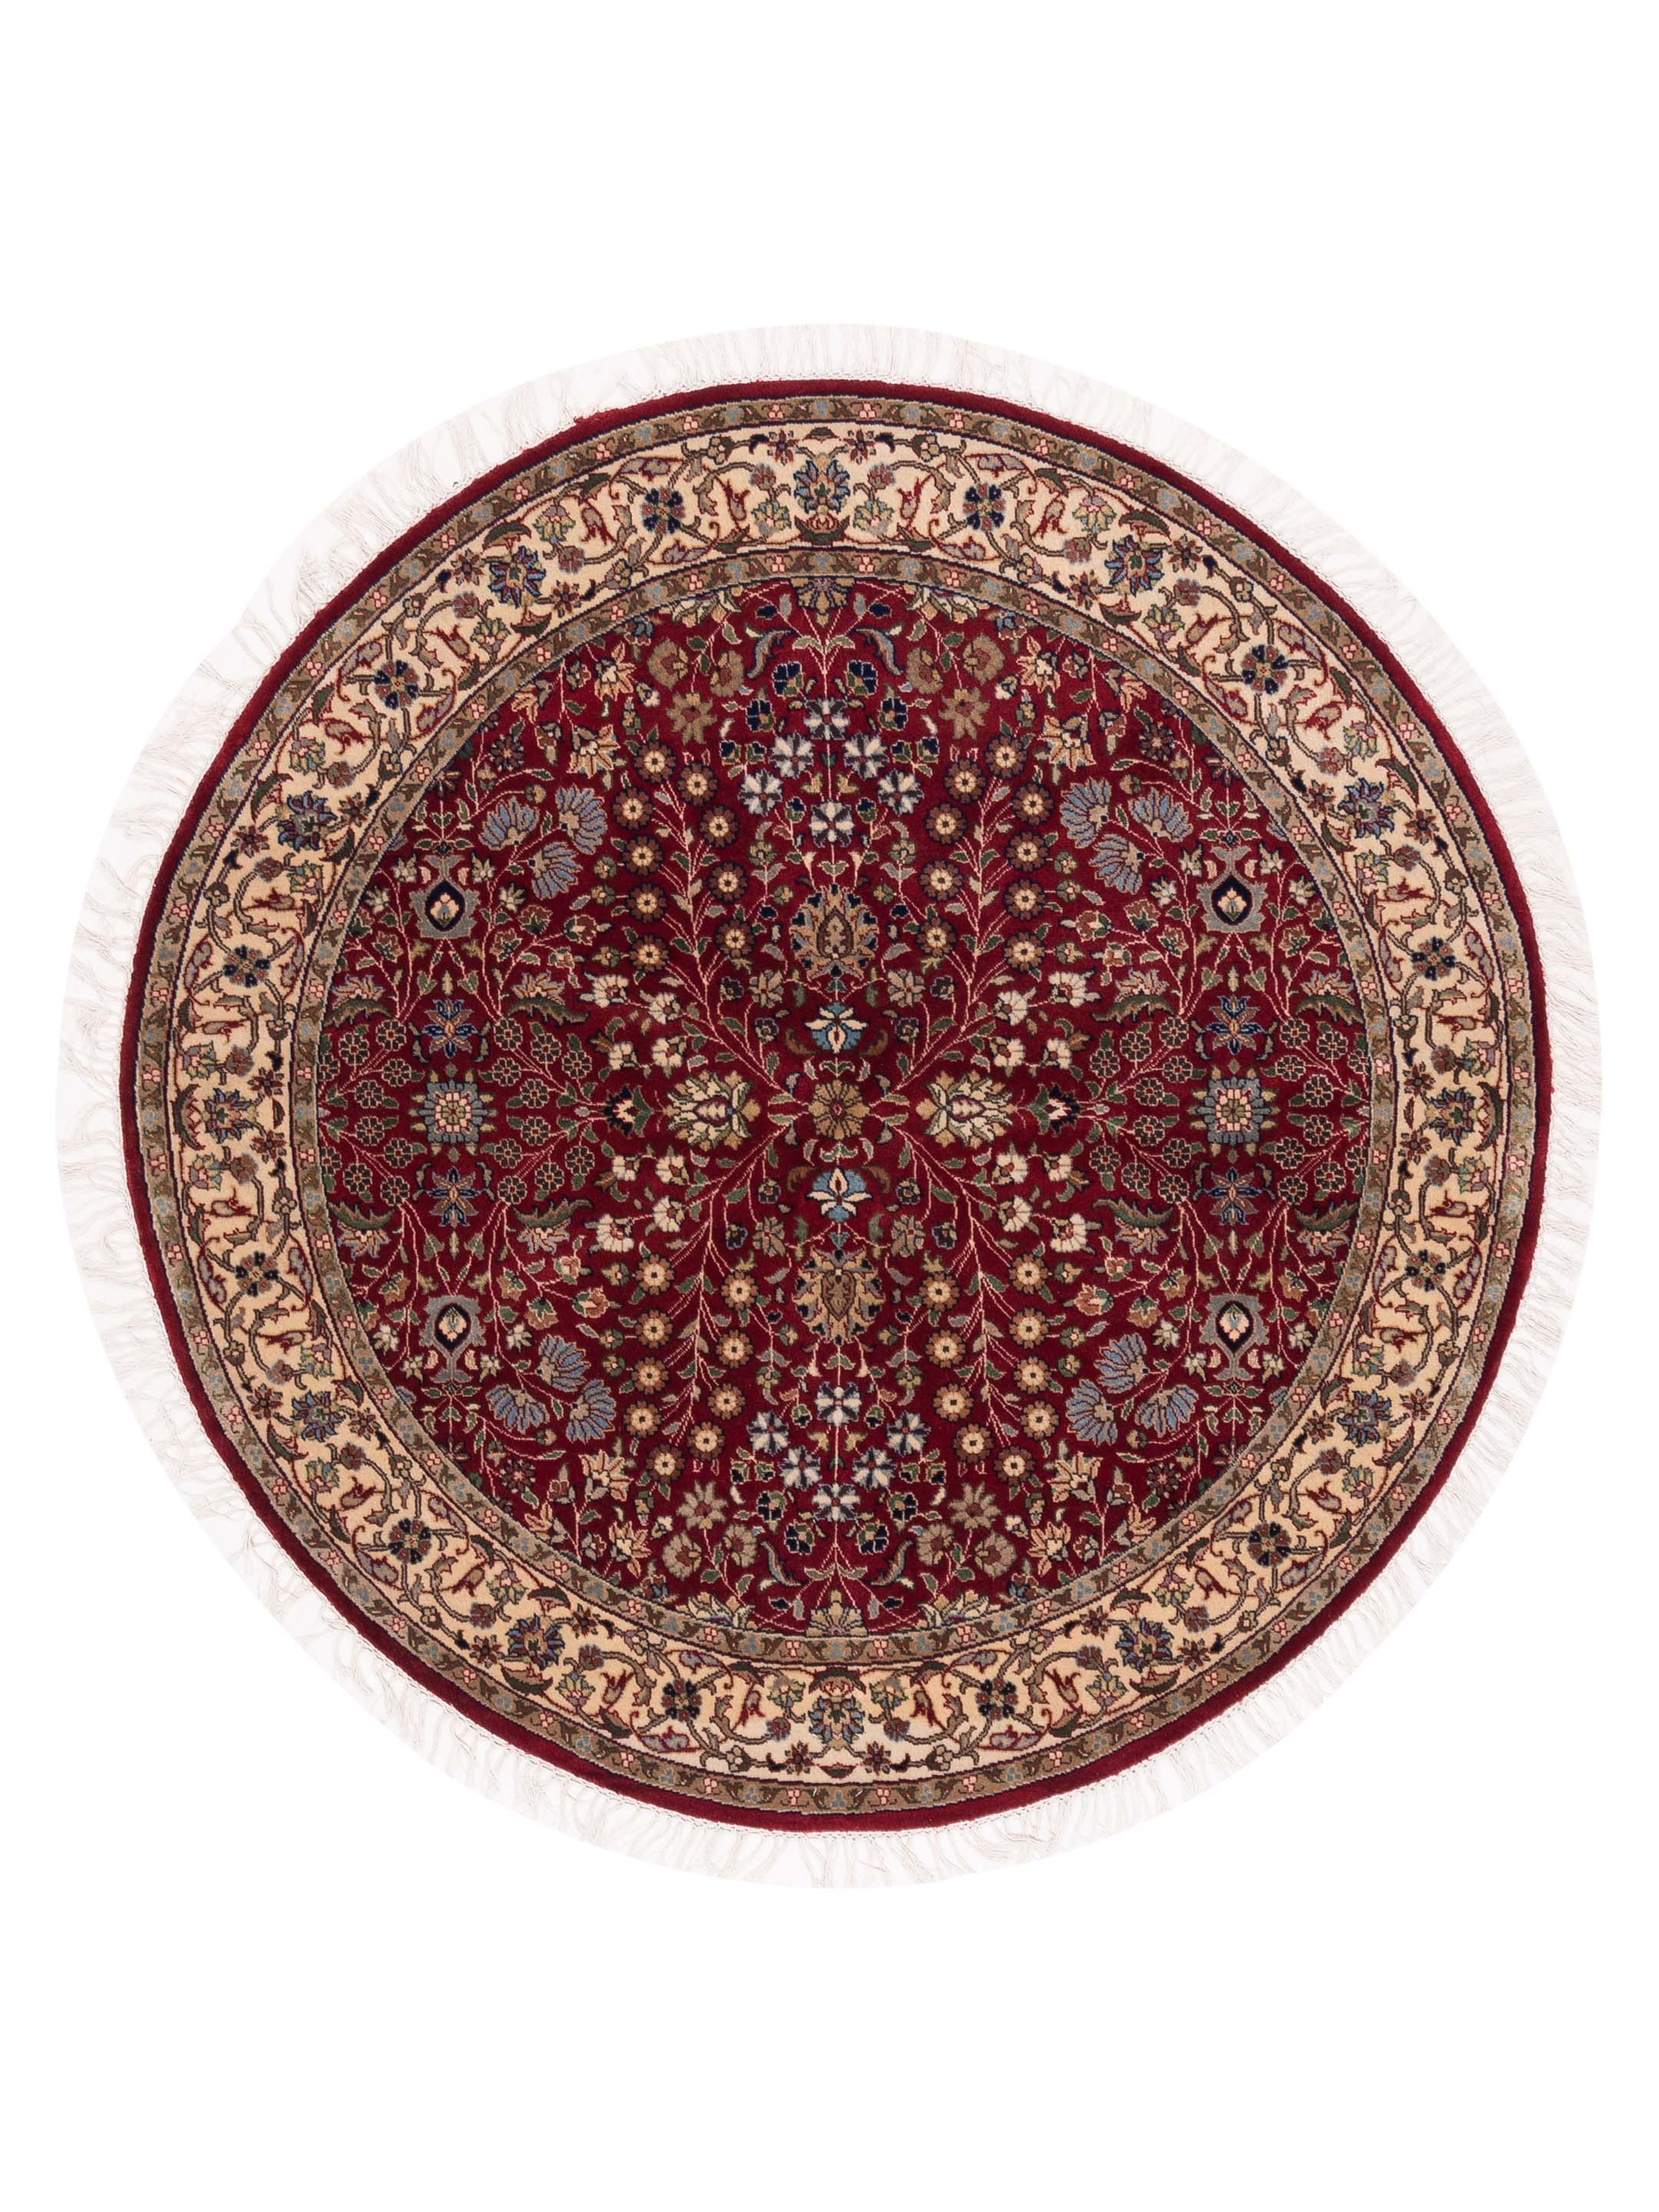 Hereke Traditional Red Ivory 5x5 Round Area Rug	